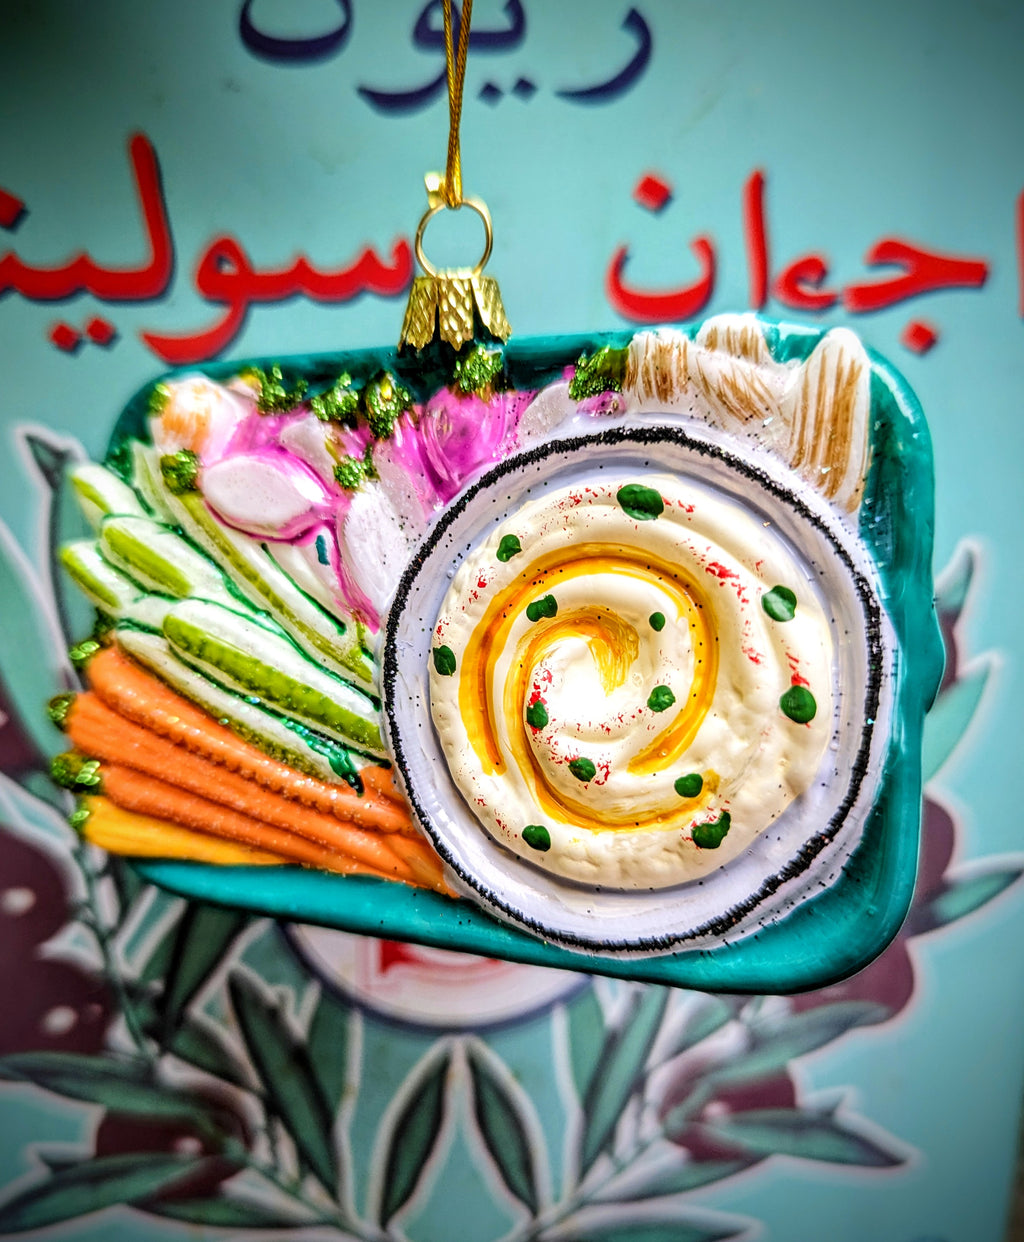 Yummy!!,, Ottolenghi's favourite.... a gorgeous, glittered platter of creamy hummus and veggies to dip

Hand finished on fantastically detailed platters! Perfect for Veggie food lovers!

Size 9cm x 8cm x 2cm

 

